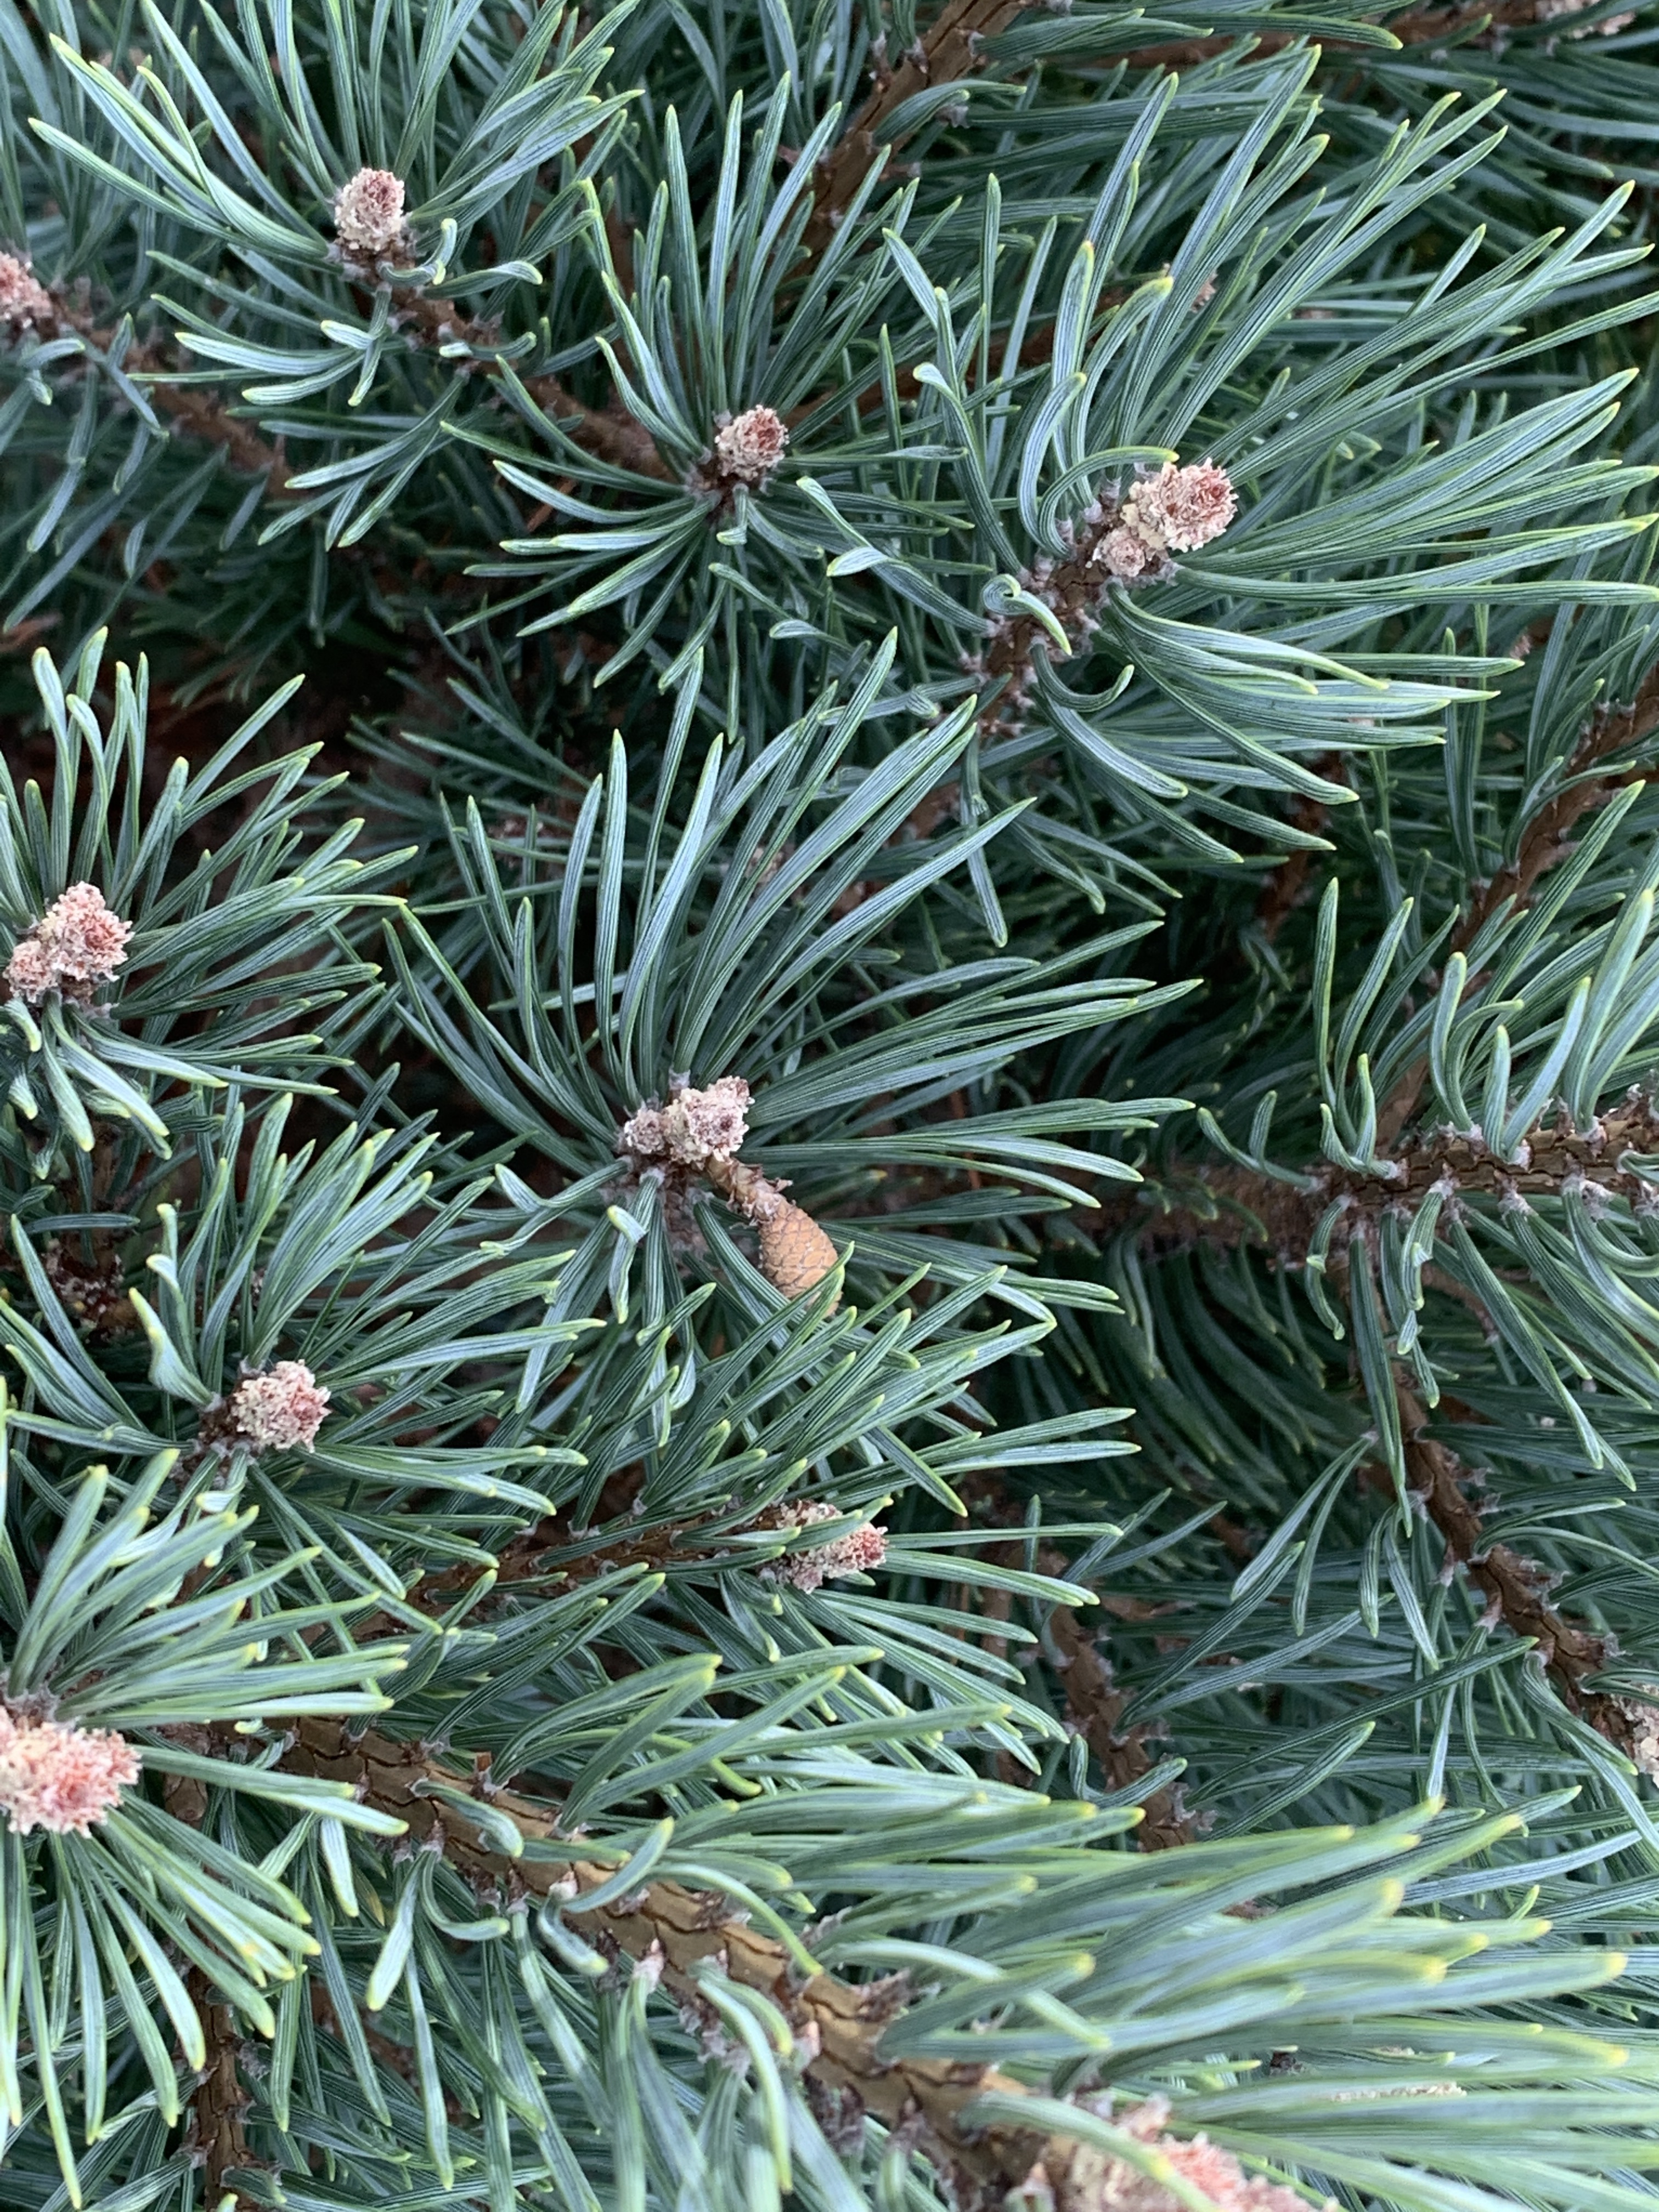 pine trees types conifer pinus needles cones everyone should know watereri buds slow rich growing selection lovely close green blue